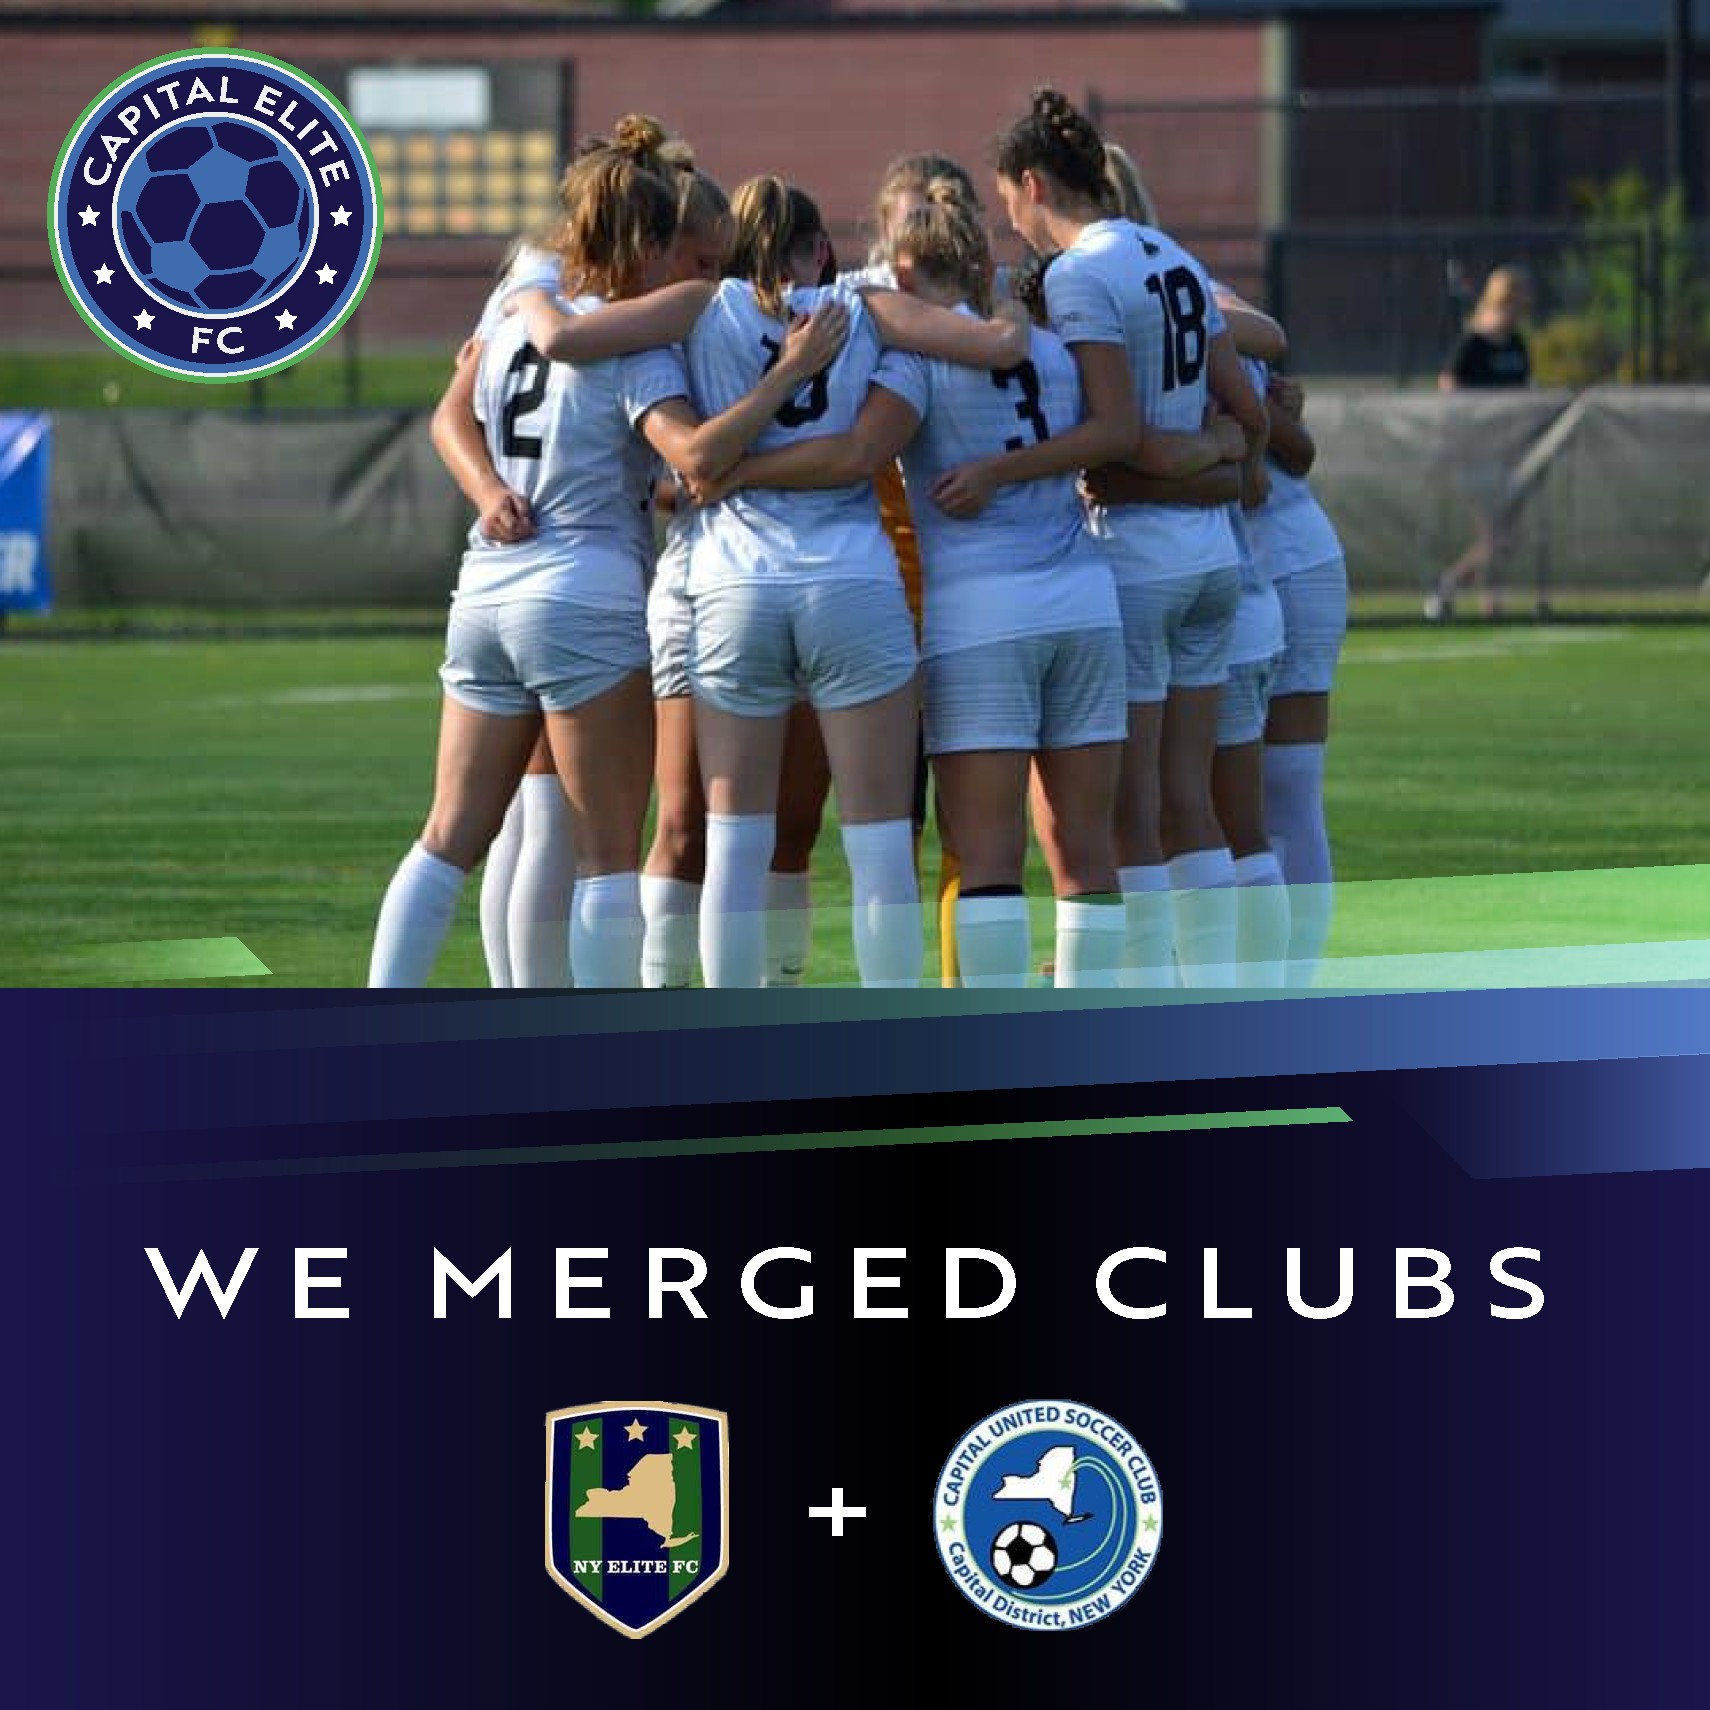 Graphic announcing merger of NY Elite FC and Capital Unlimited girls soccer clubs.